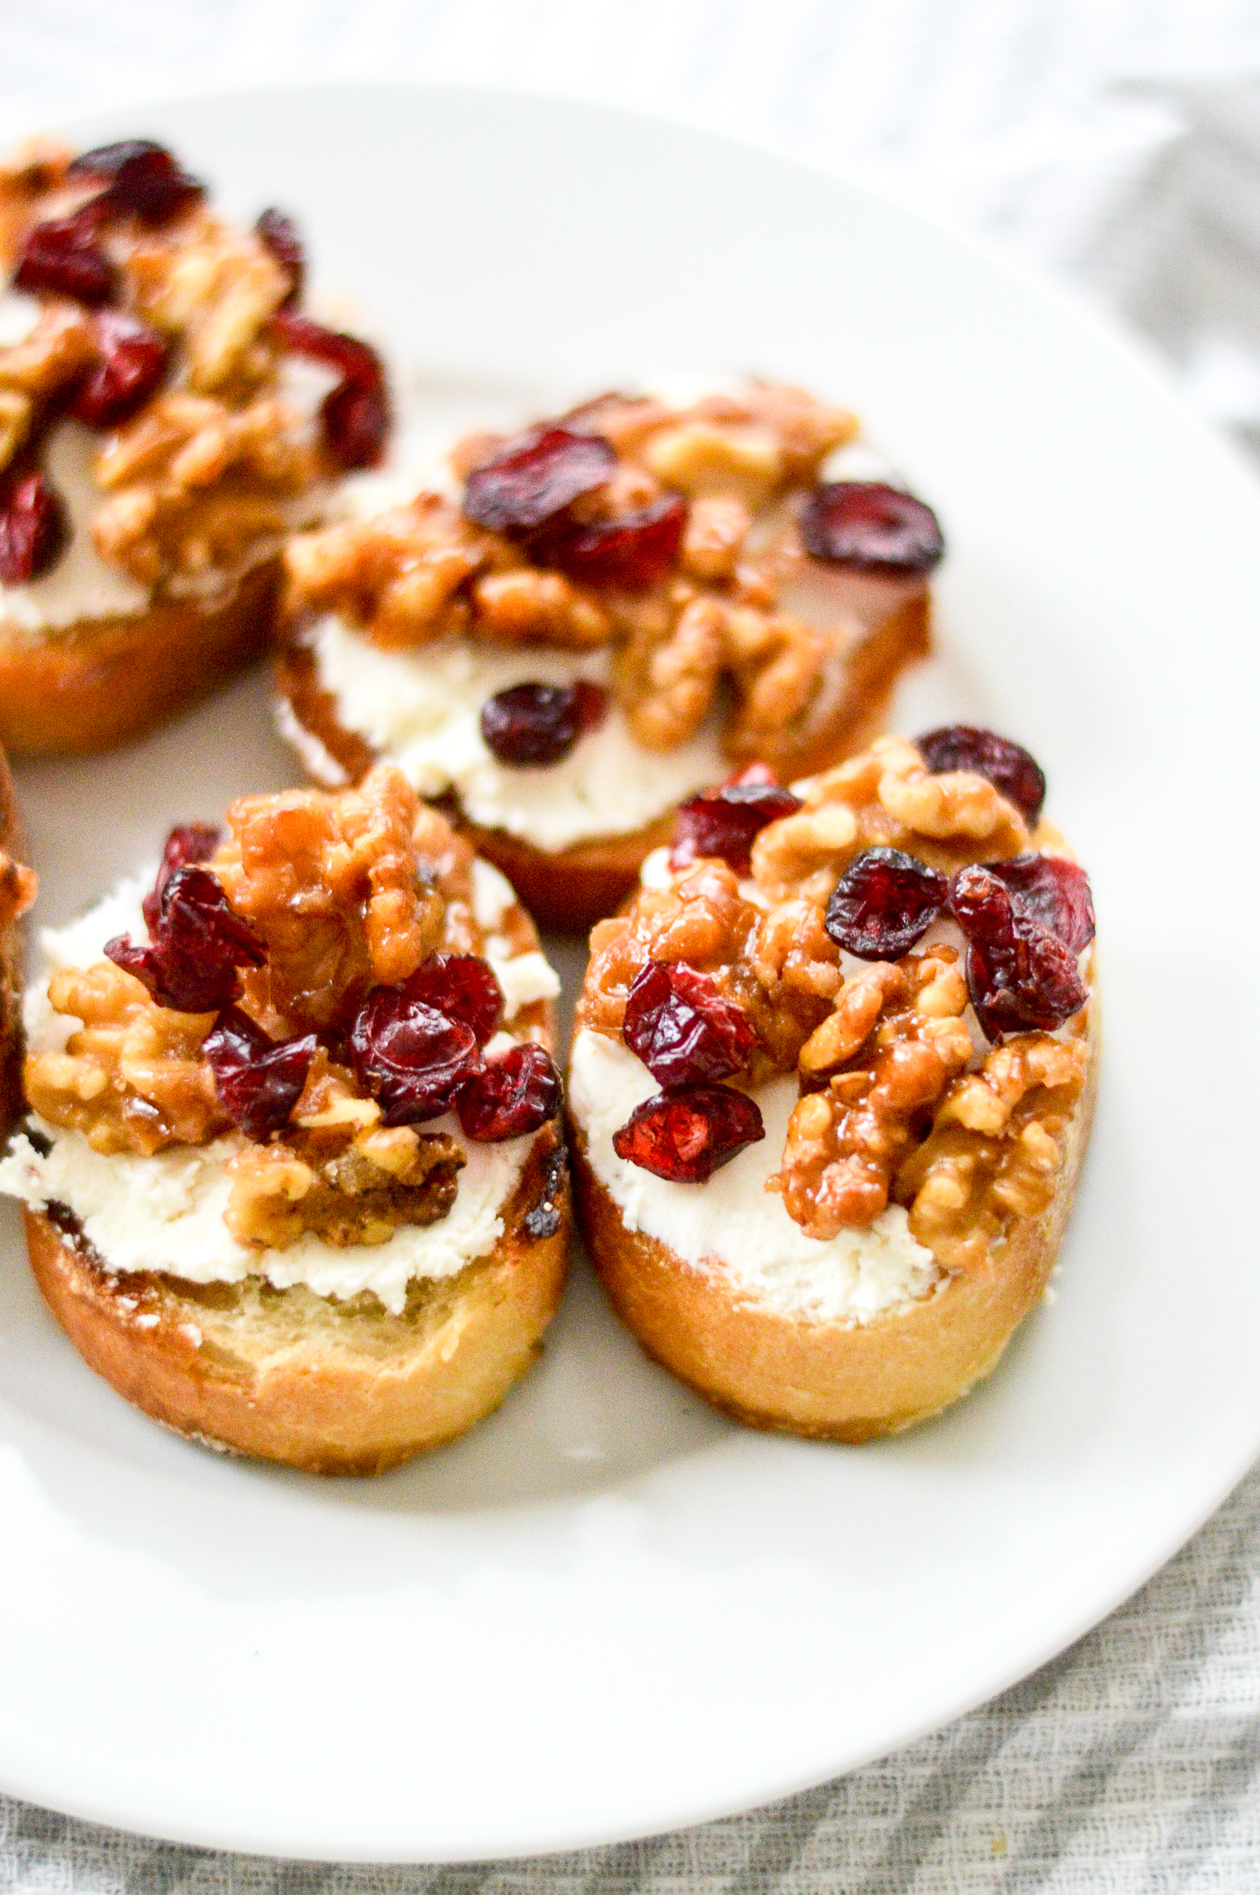 Candied Walnut Tartines - DC Girl in Pearls